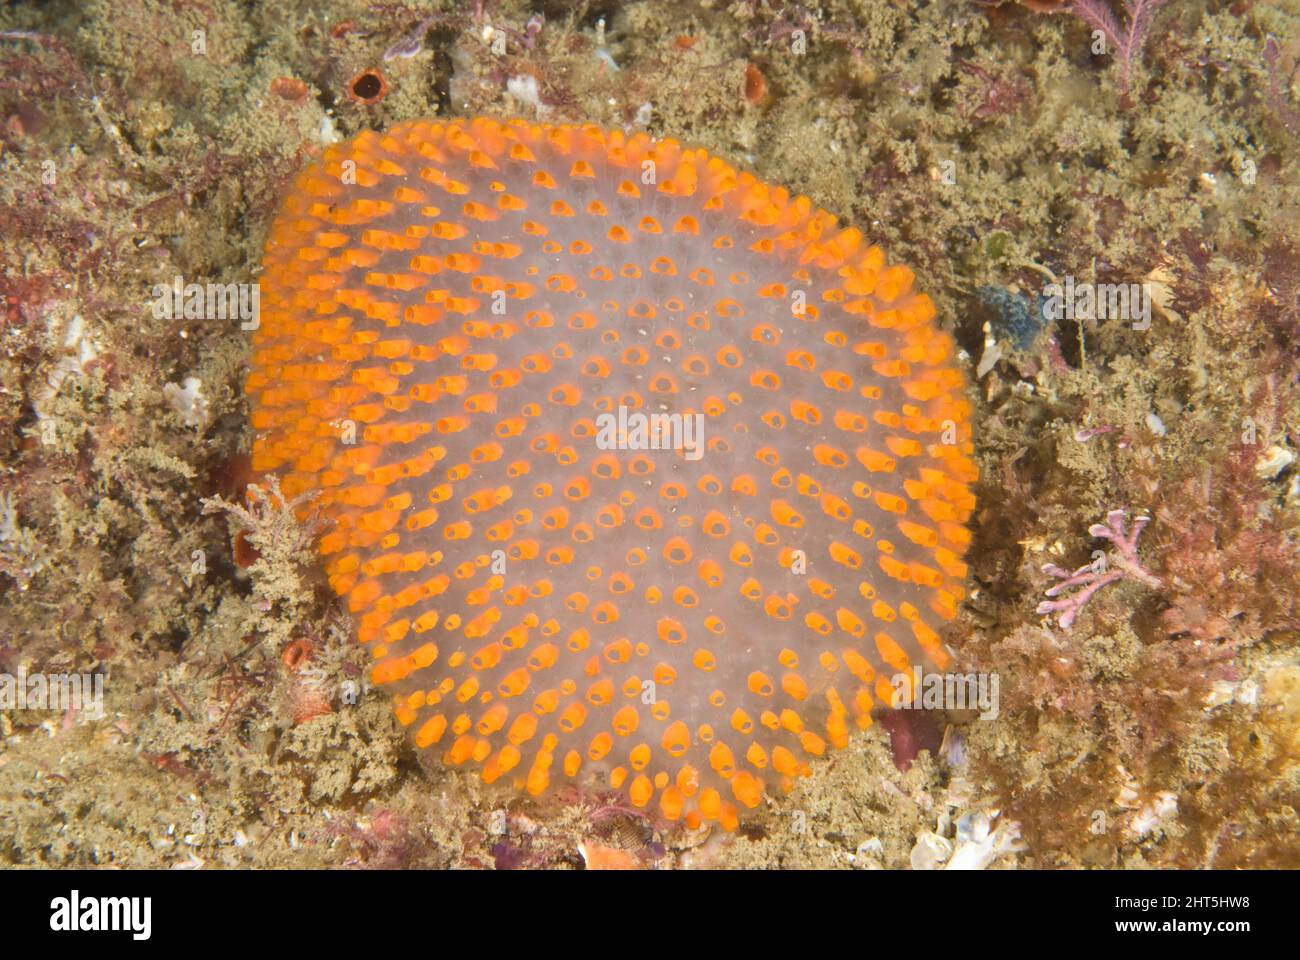 Giant jelly ascidian (Polycitor giganteus), a colonial animal with numerous retractible zooids usually embedded together within a test. Stock Photo